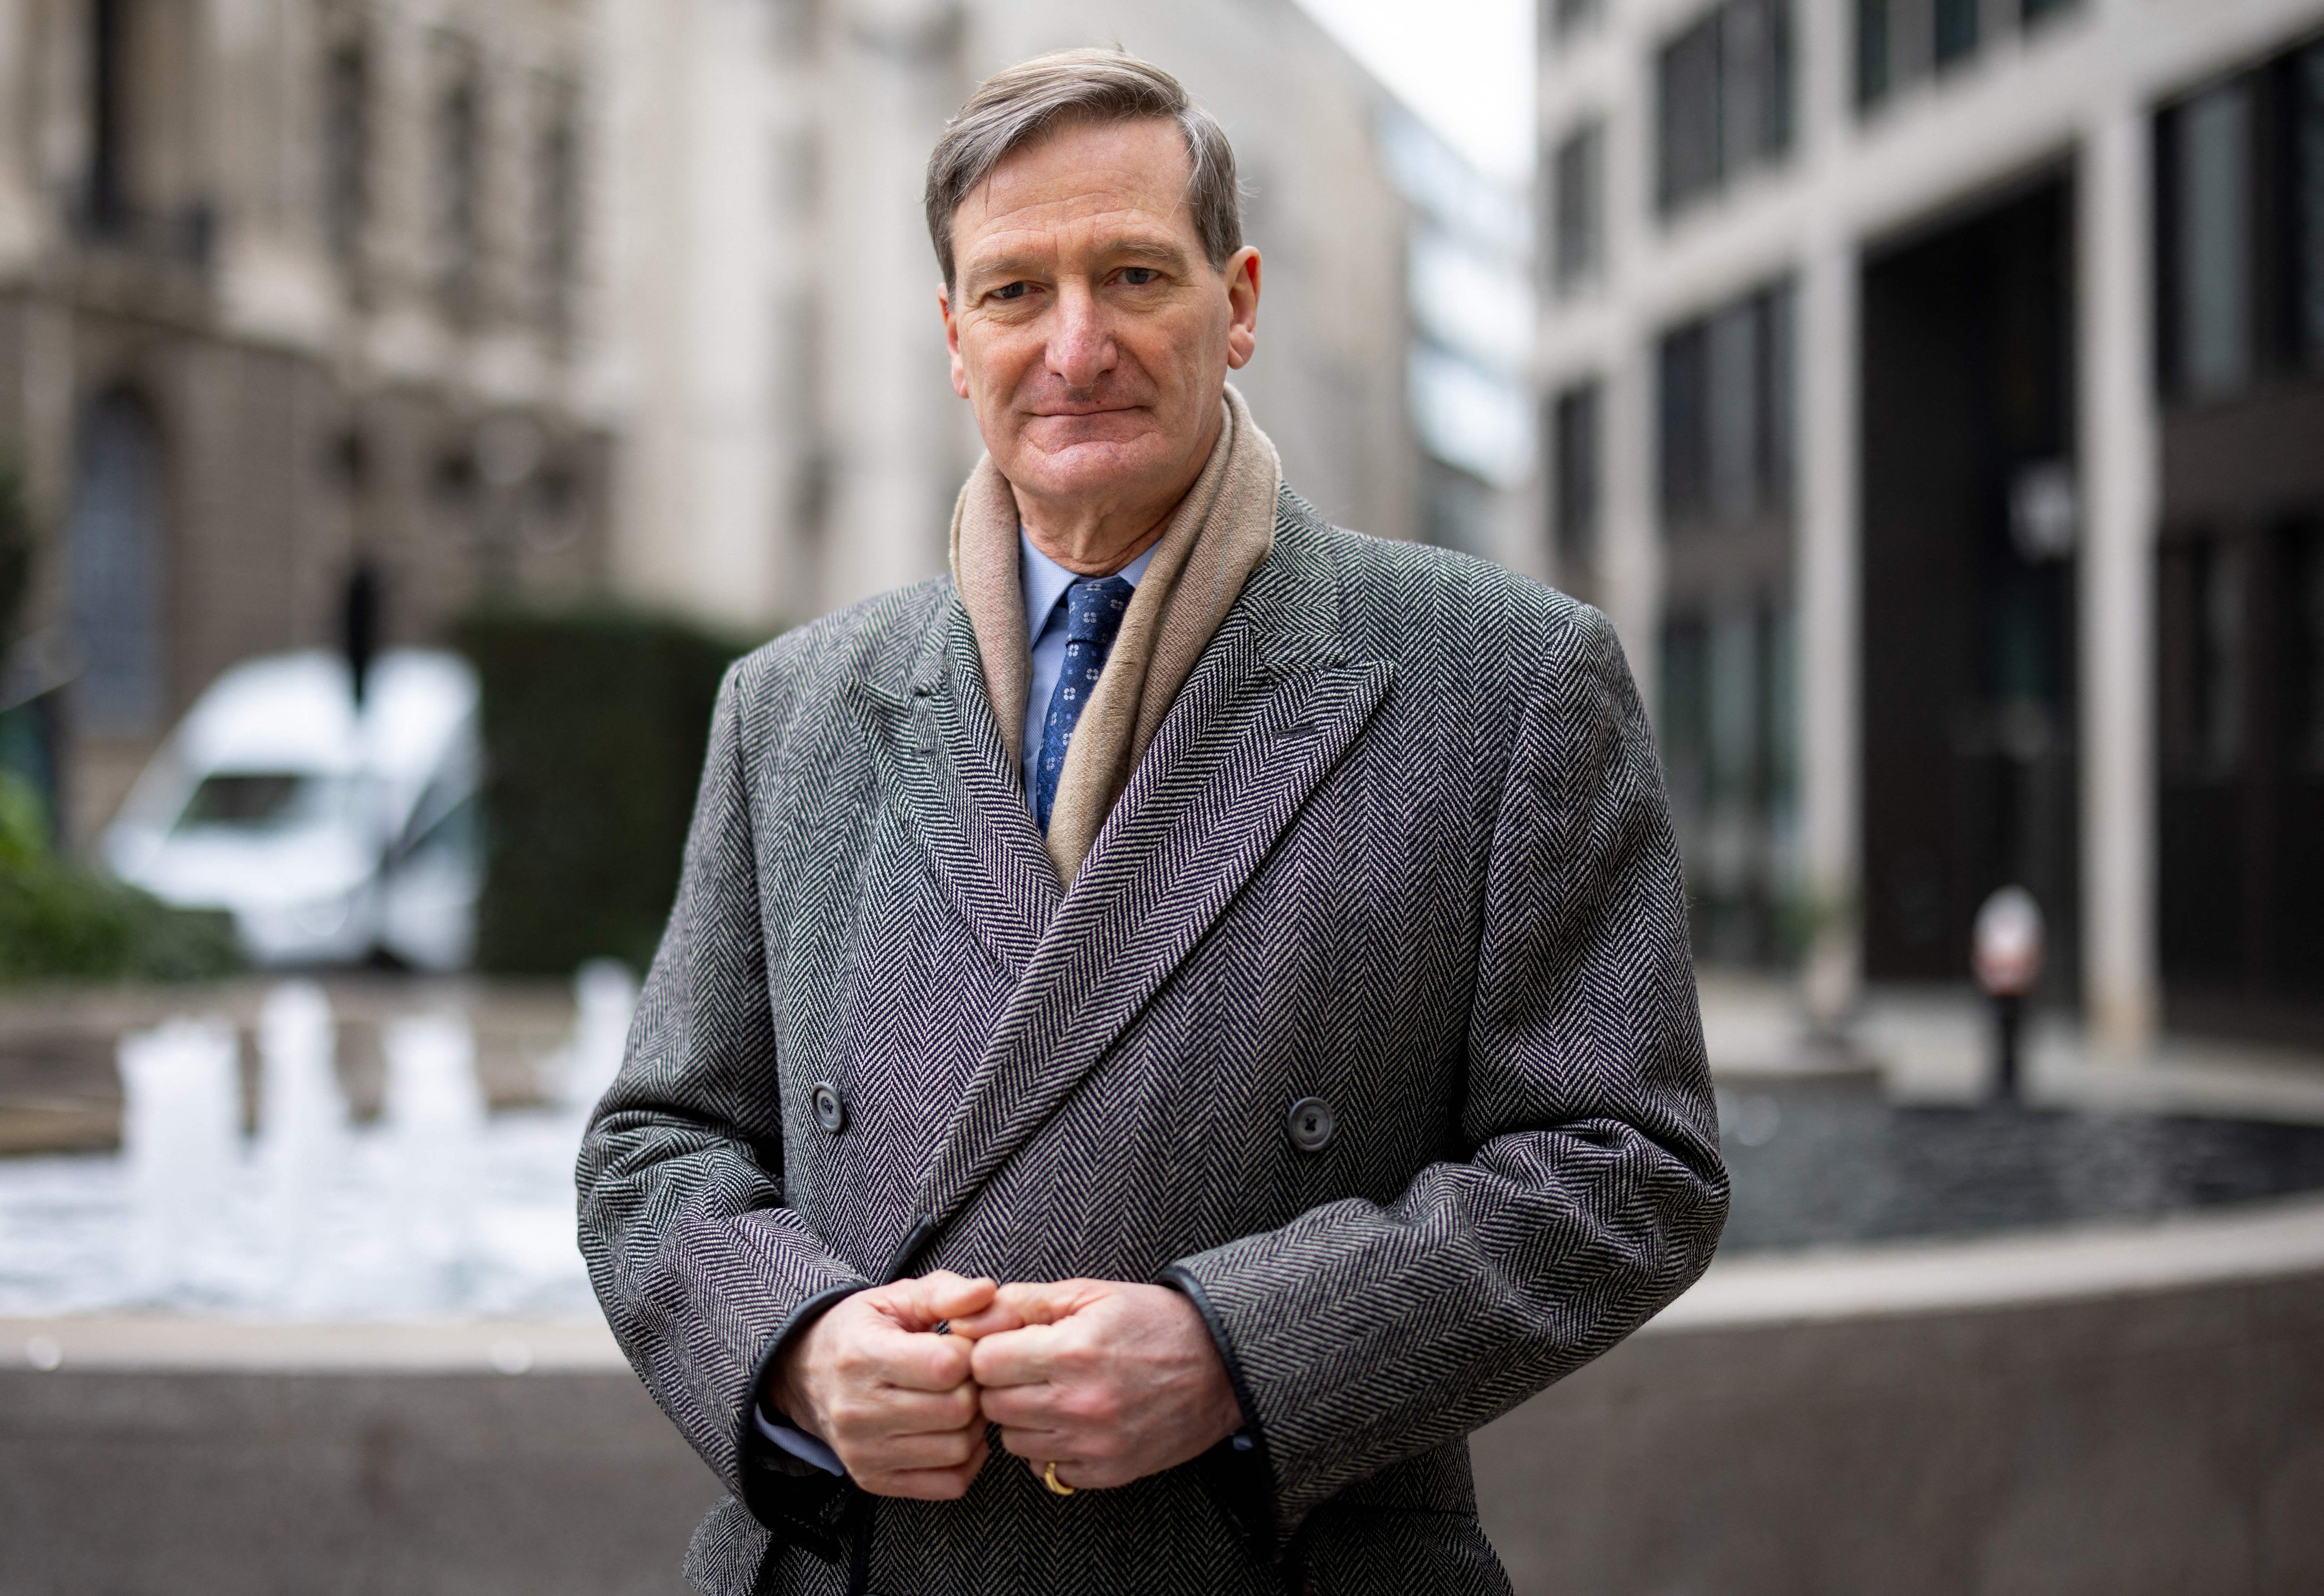 Dominic Grieve, the former Tory attorney general, said the party was getting what “they deserve” after years of chaos